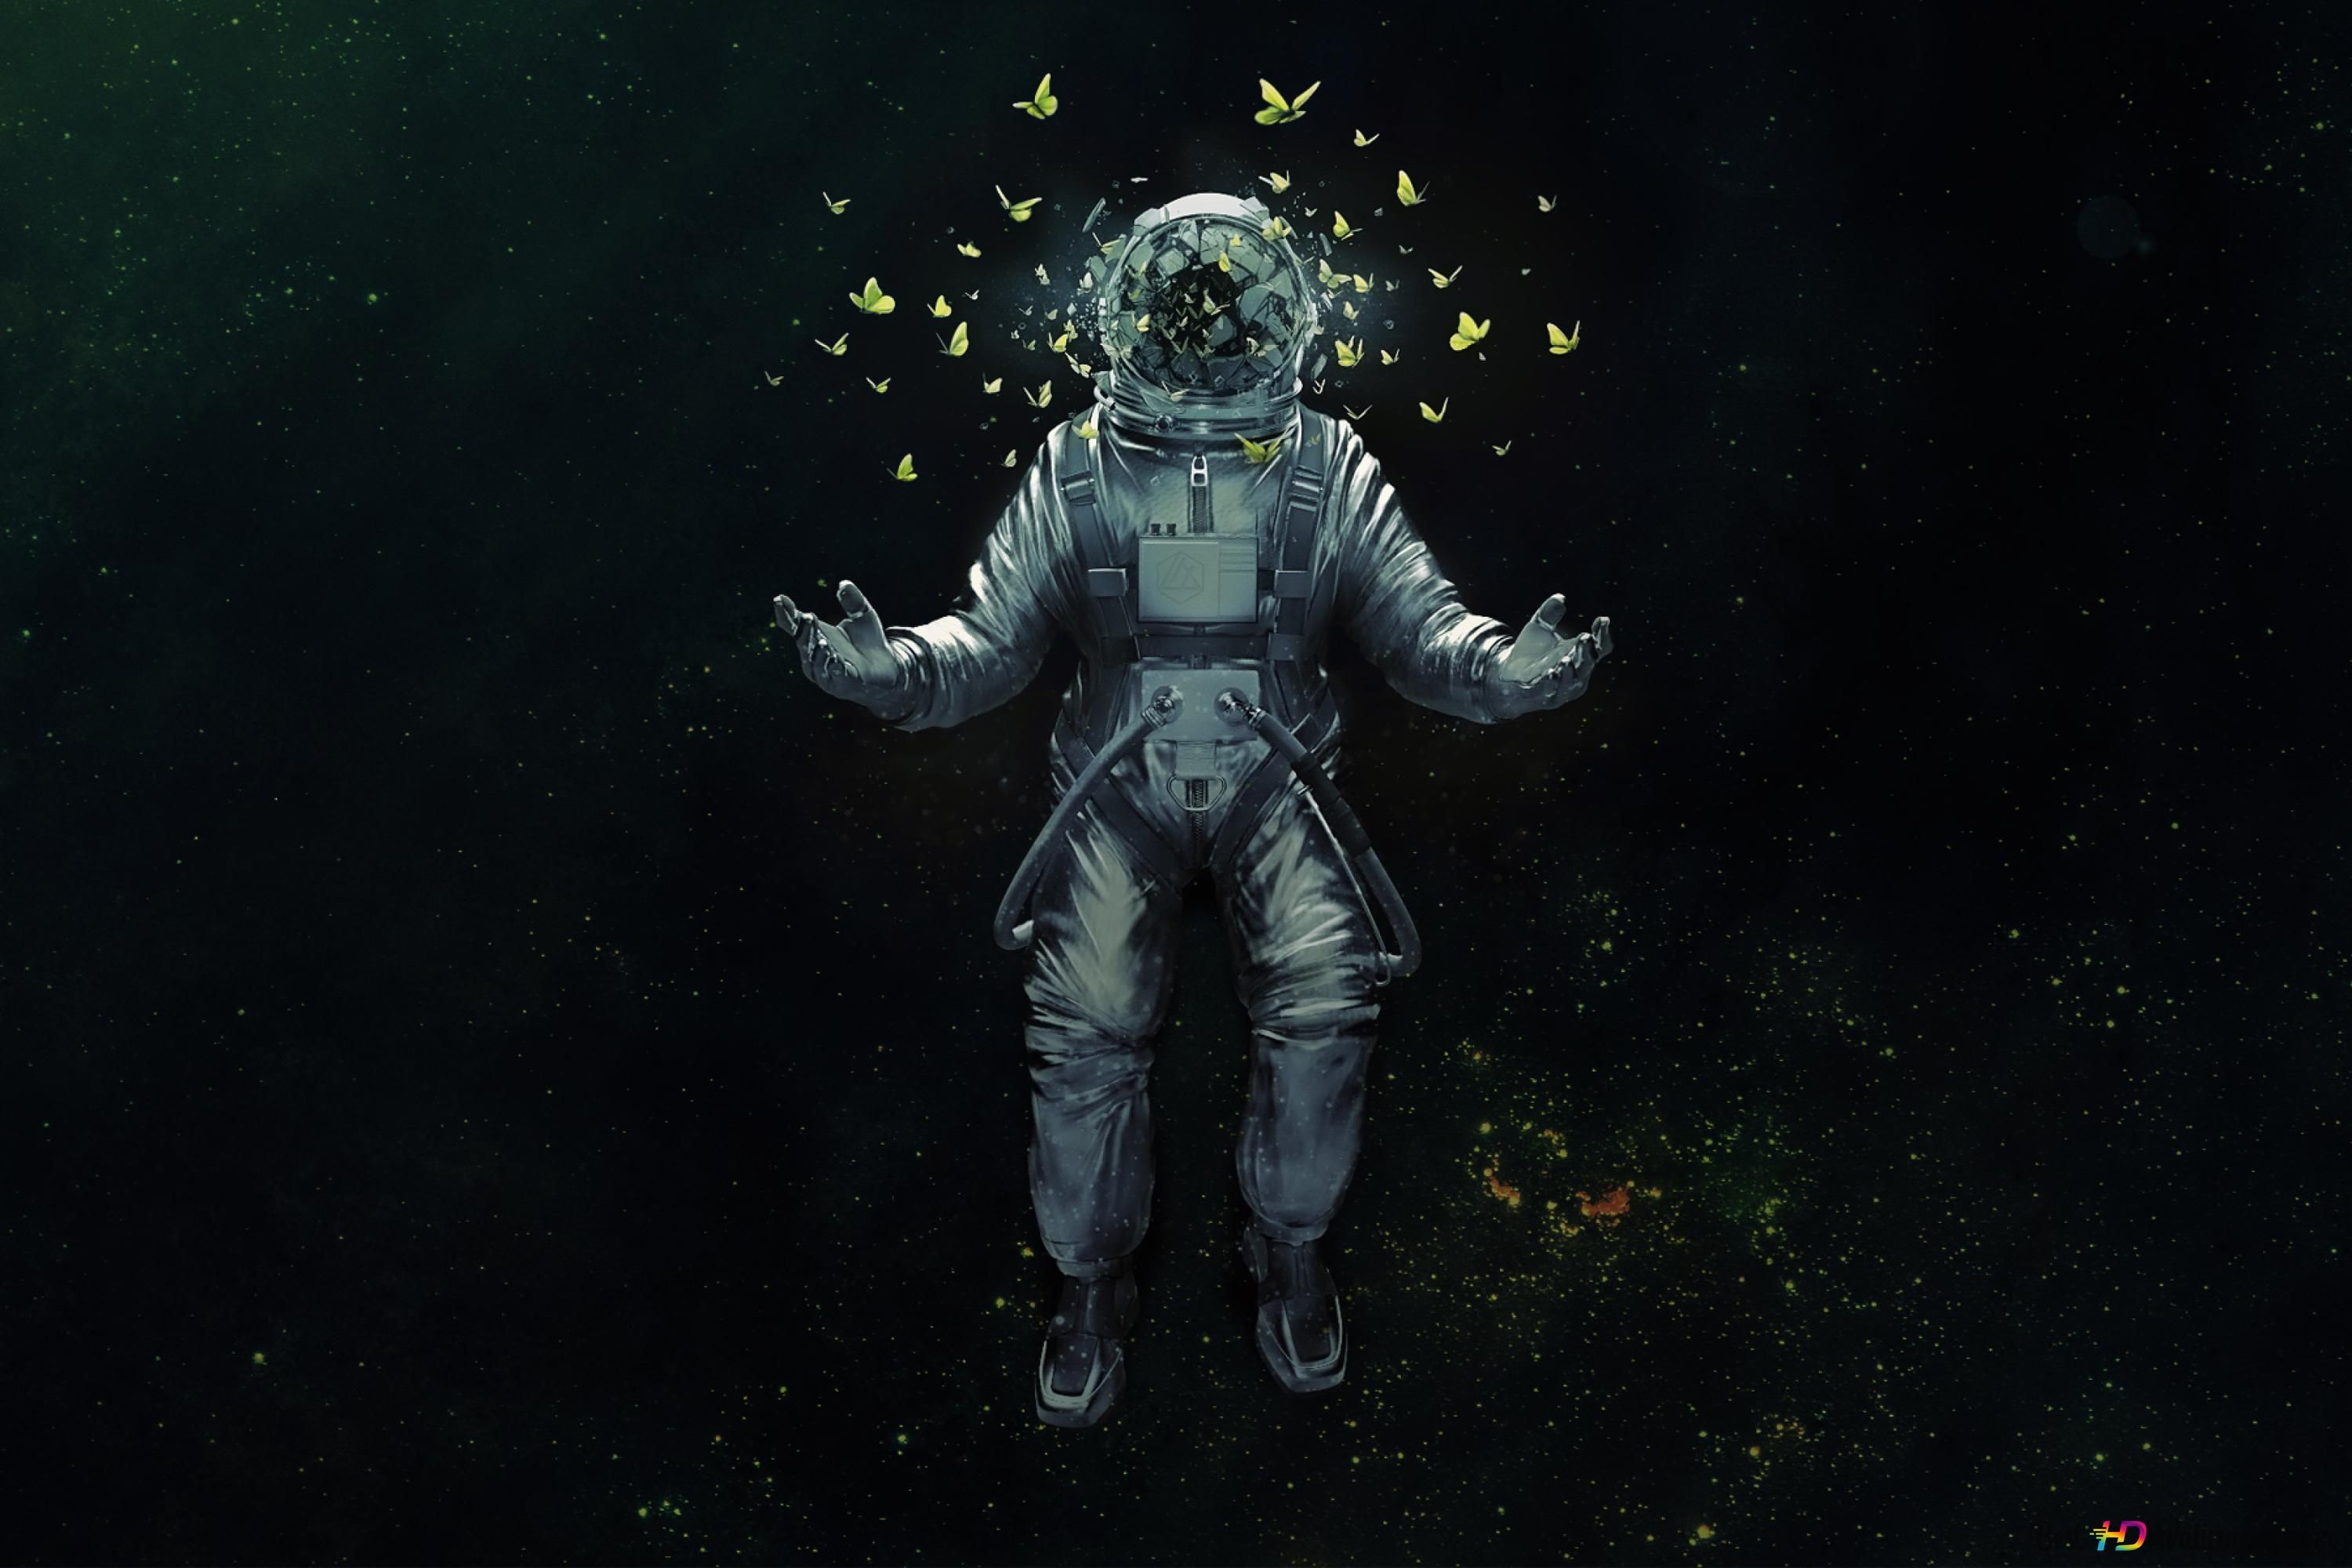 A man in an astronaut suit with bugs on him - Astronaut, space